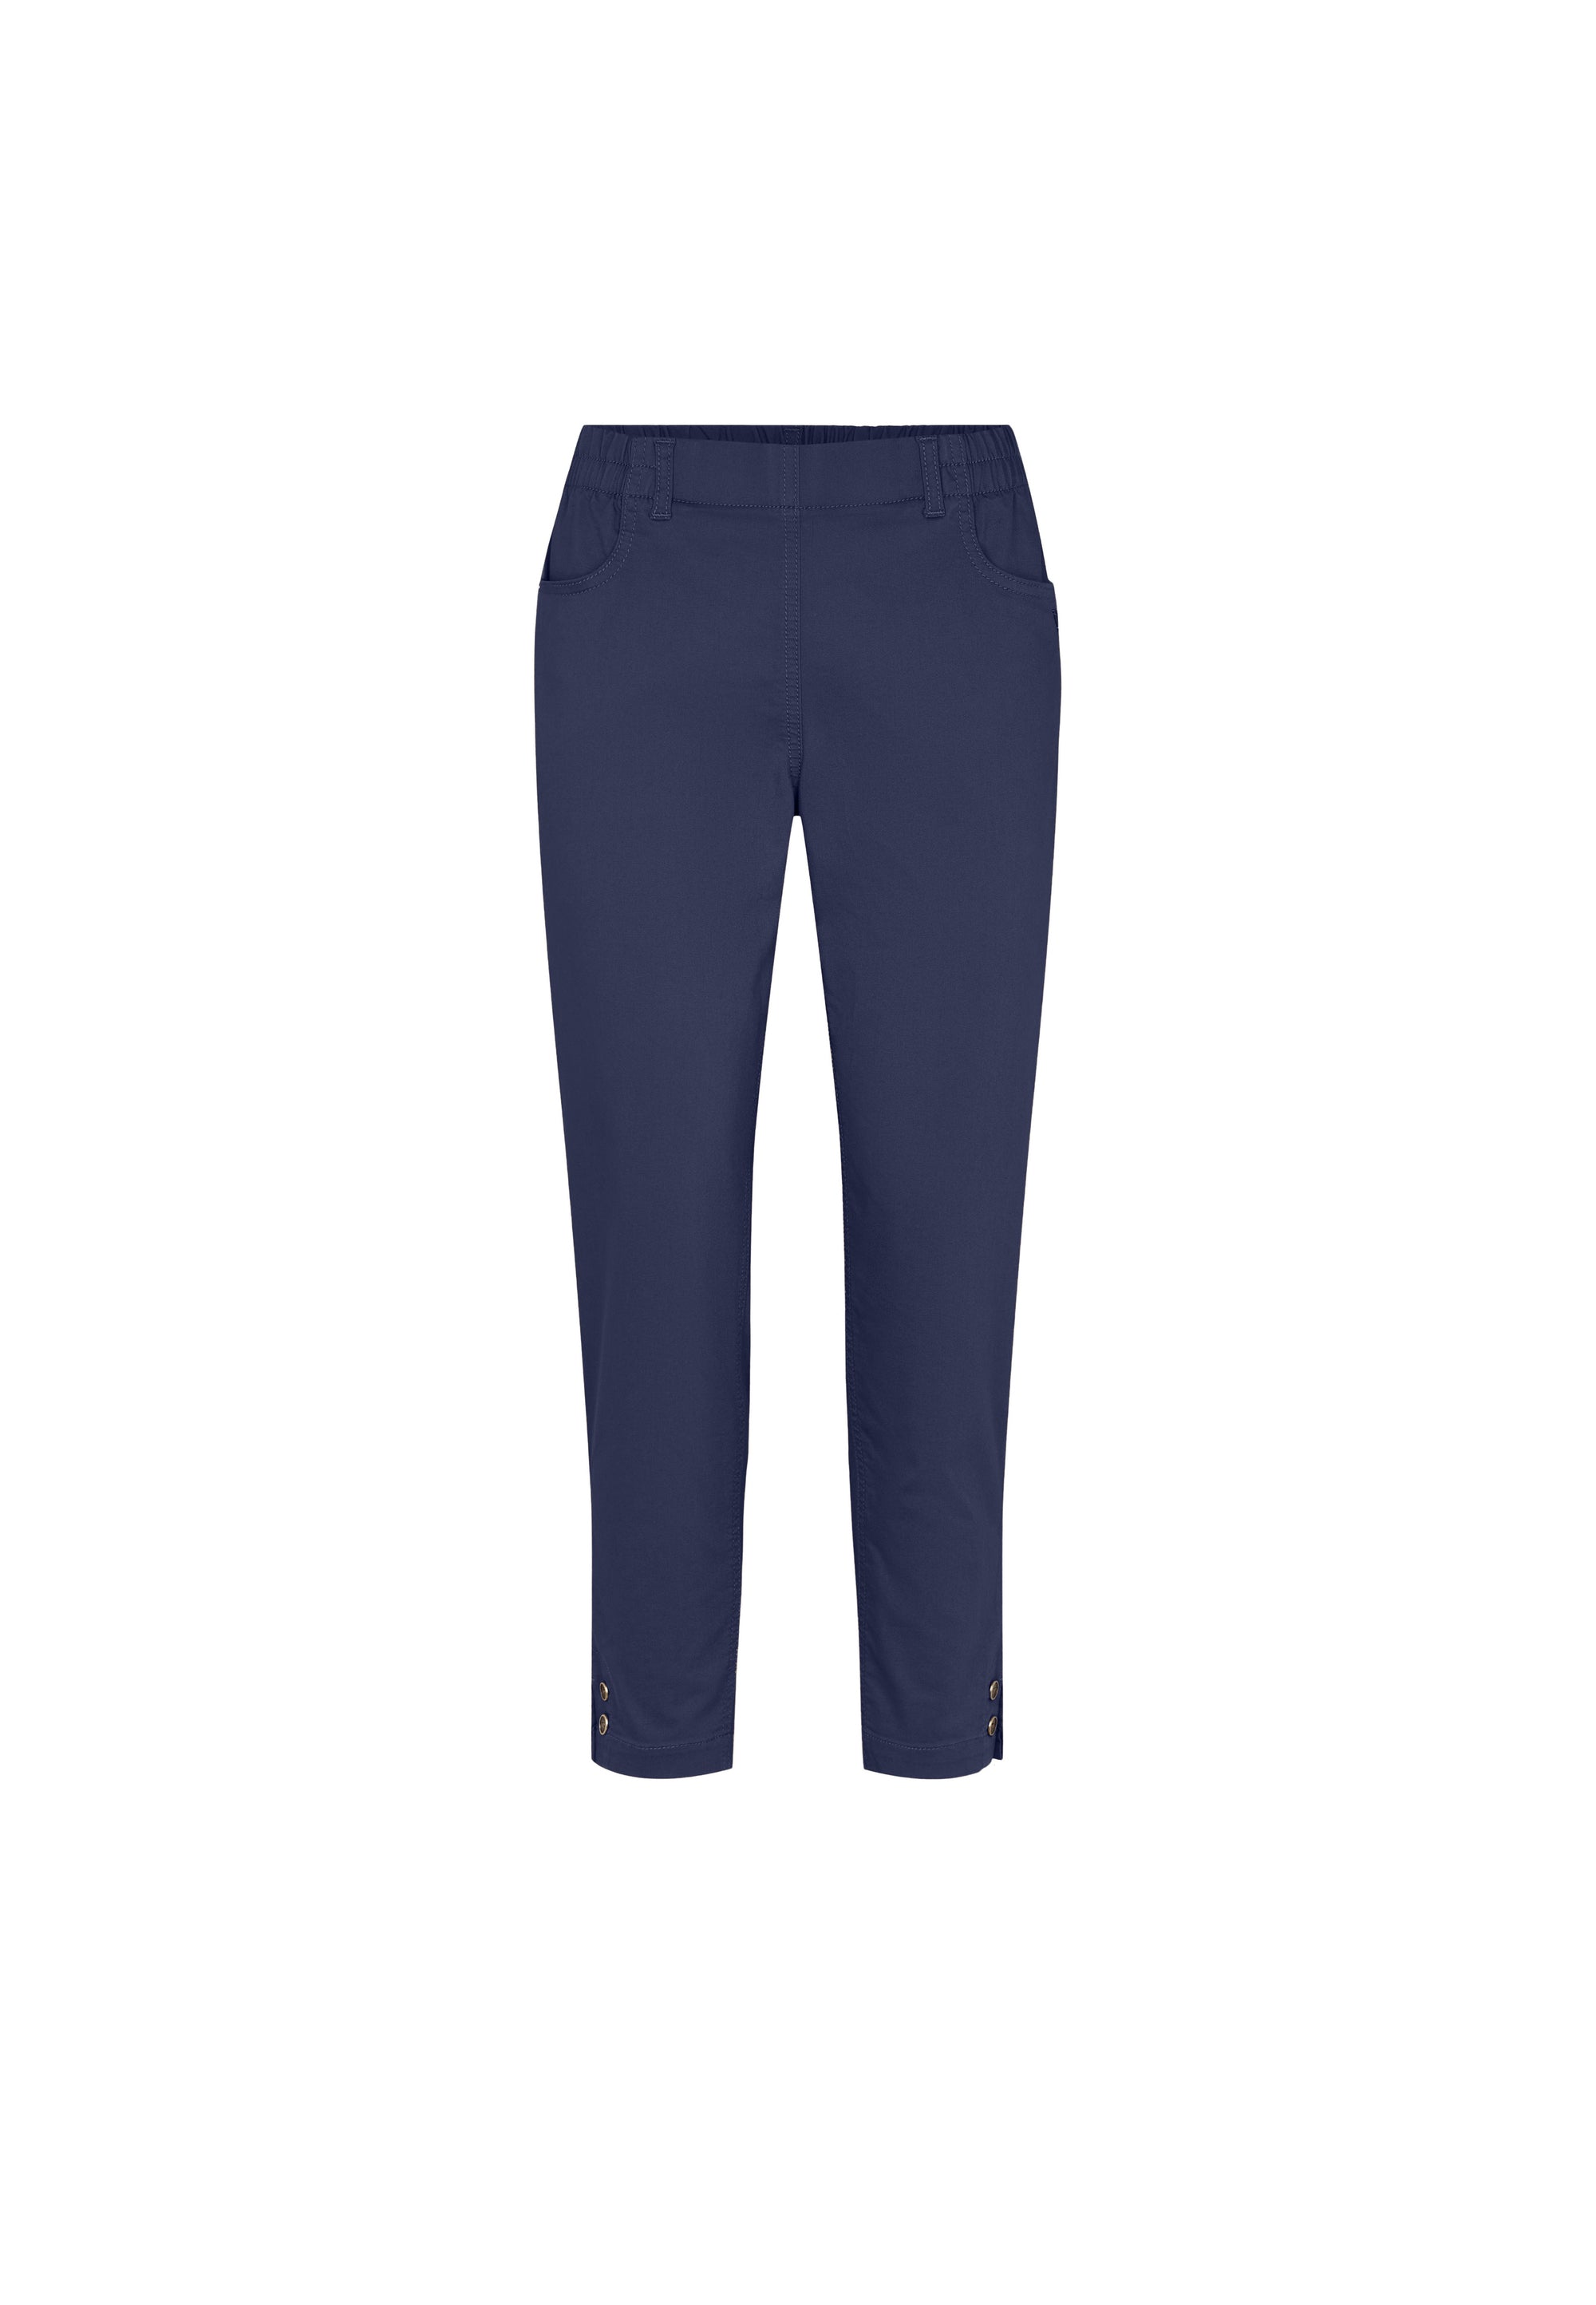 LAURIE  Ellie Relaxed - Extra Short Length Trousers RELAXED 49200 Navy